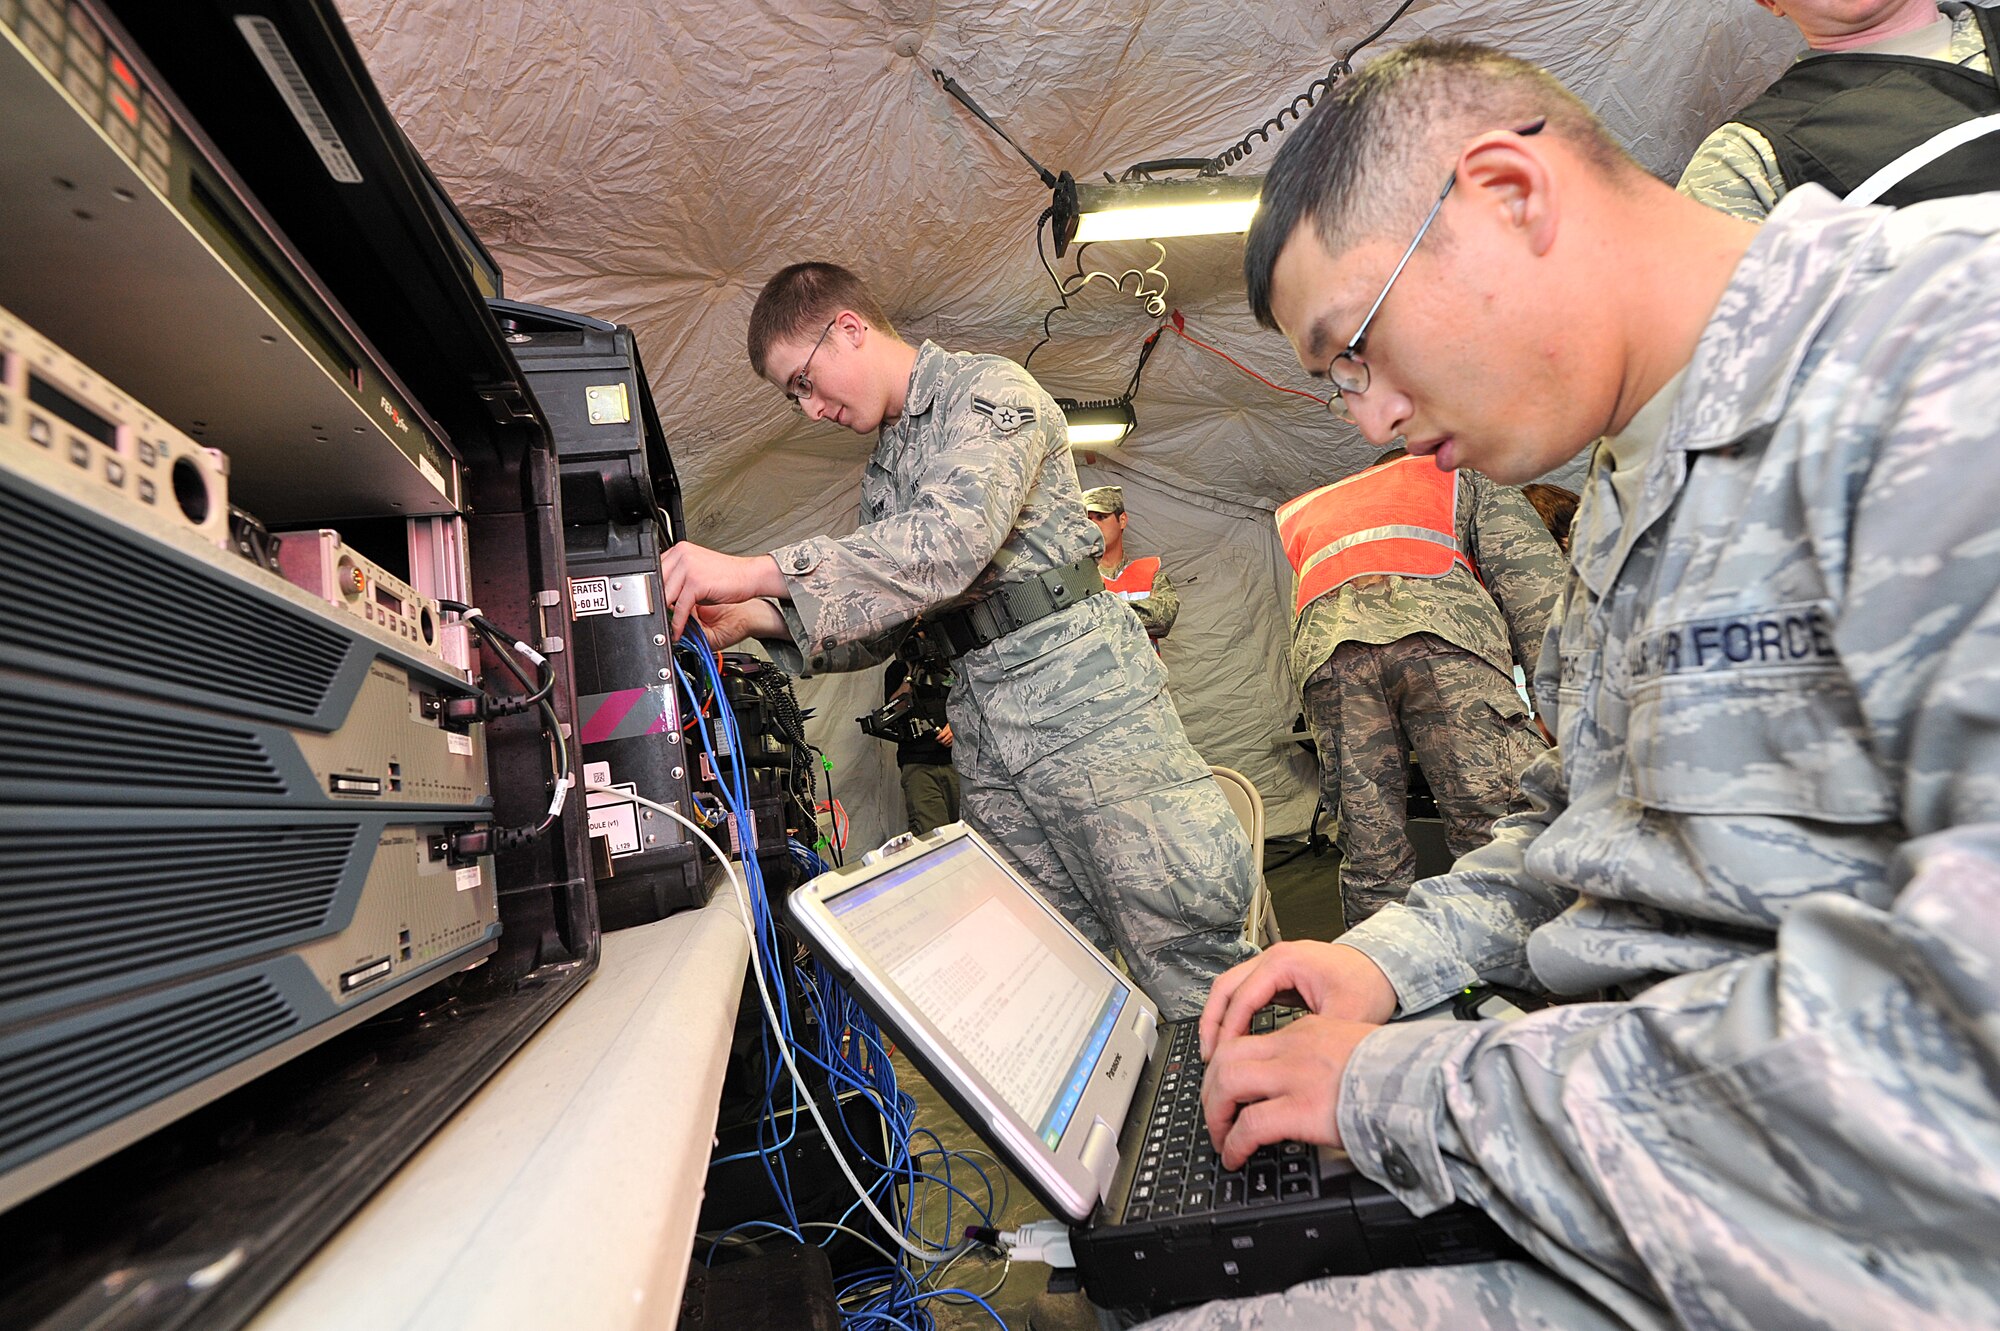 SAVANNAH AIR NATIONAL GUARD BASE, Ga. – Staff Sgt. David Harris and Airman 1st Class Nathaniel Osborn, 52nd Combat Communications Squadron, configure the initial communications element system, designed to deliver NIPRNET, SIPRNET, and secure/non-secure voice communications to bare-base deployed locations, here Jan. 24. The 52nd began its Arctic Gator field training exercise Jan. 24 and will build, operate in and defend a fully functioning bare base communications camp before the exercise ends Feb. 3. (U.S. Air Force photo by Tommie Horton)